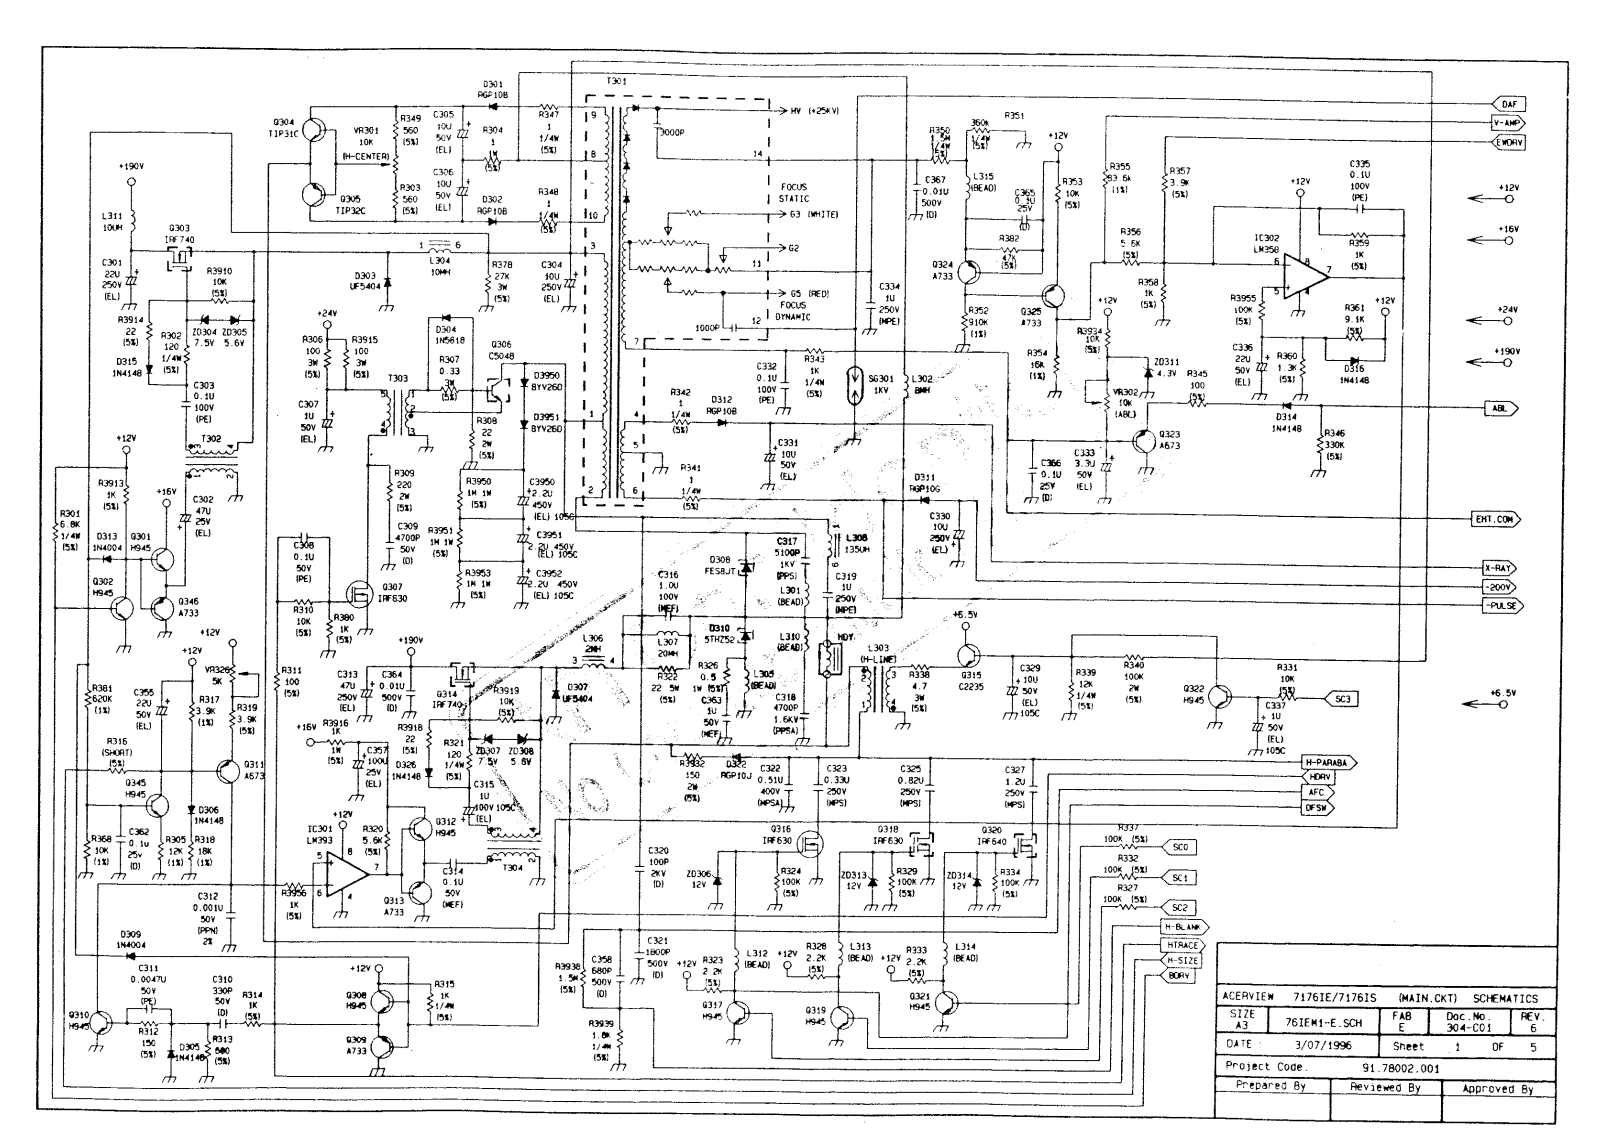 Acer 7176 IE, 7176 IS Schematic